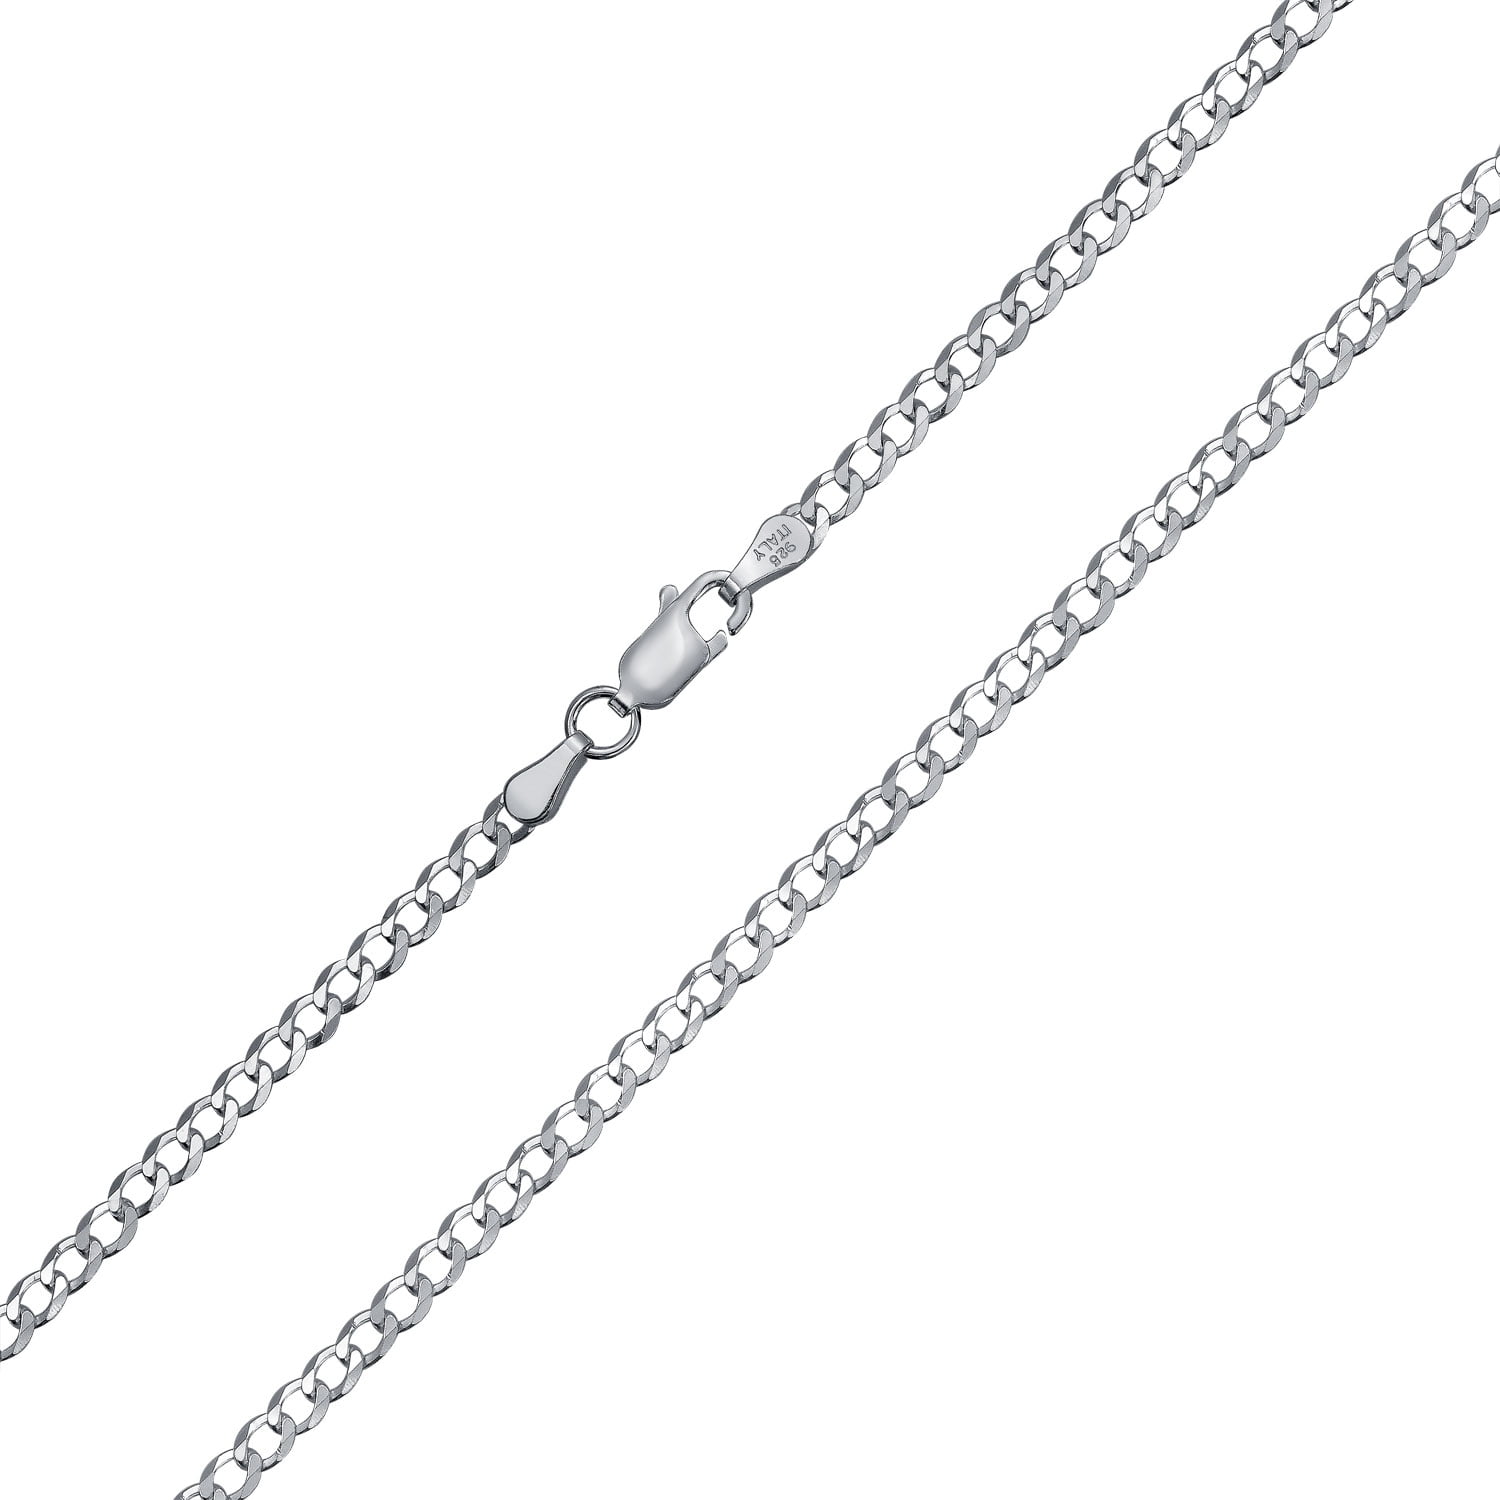 The Chain Company Sterling Silver 18 20 Inch 1.0mm Thick Italian Box Chain Necklace